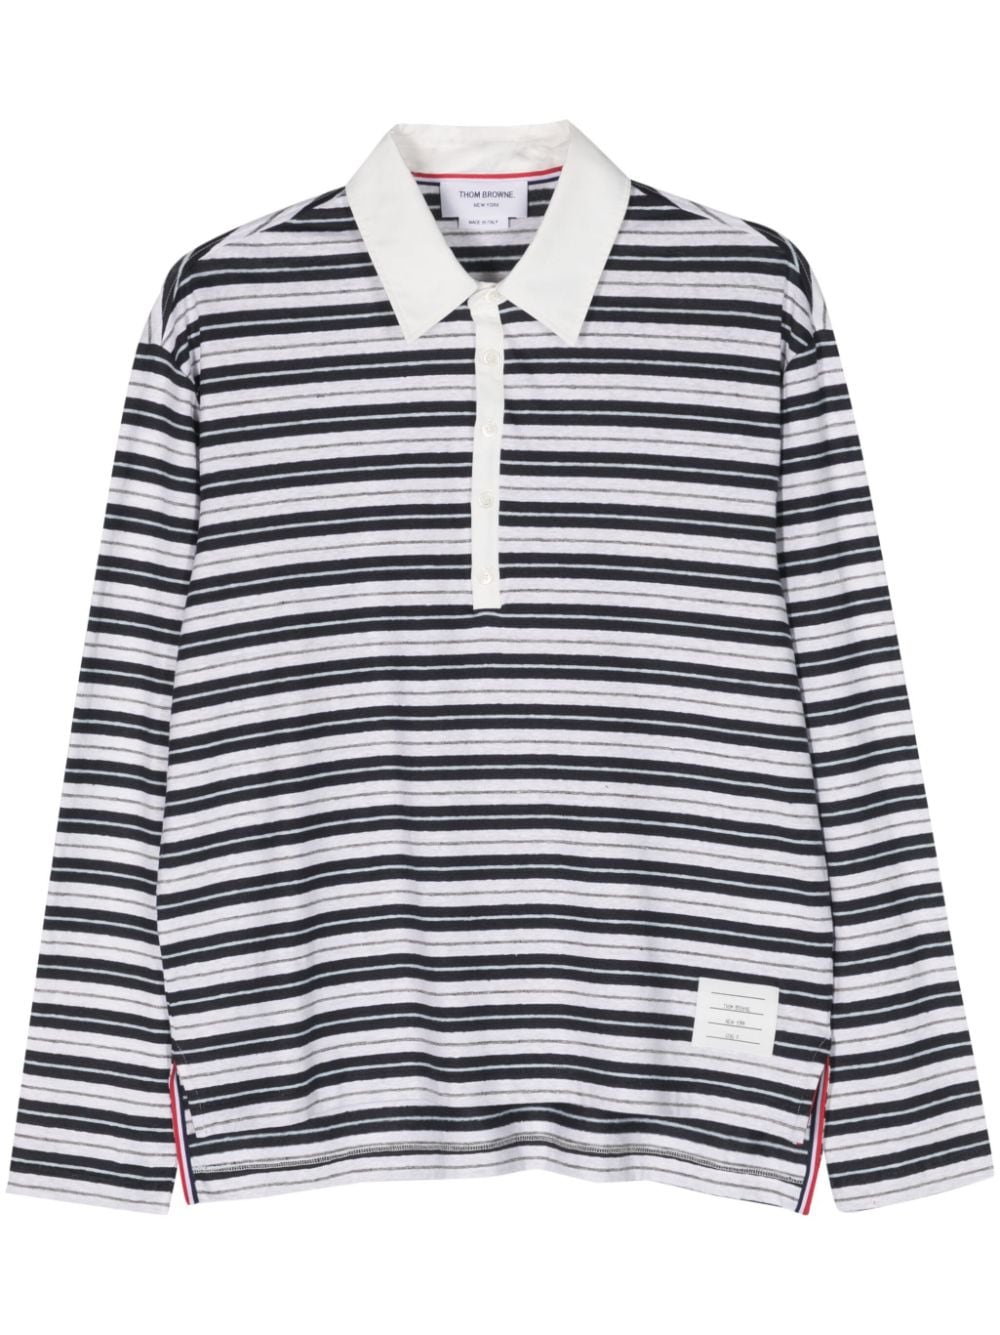 Image 1 of Thom Browne striped long-sleeve polo shirt